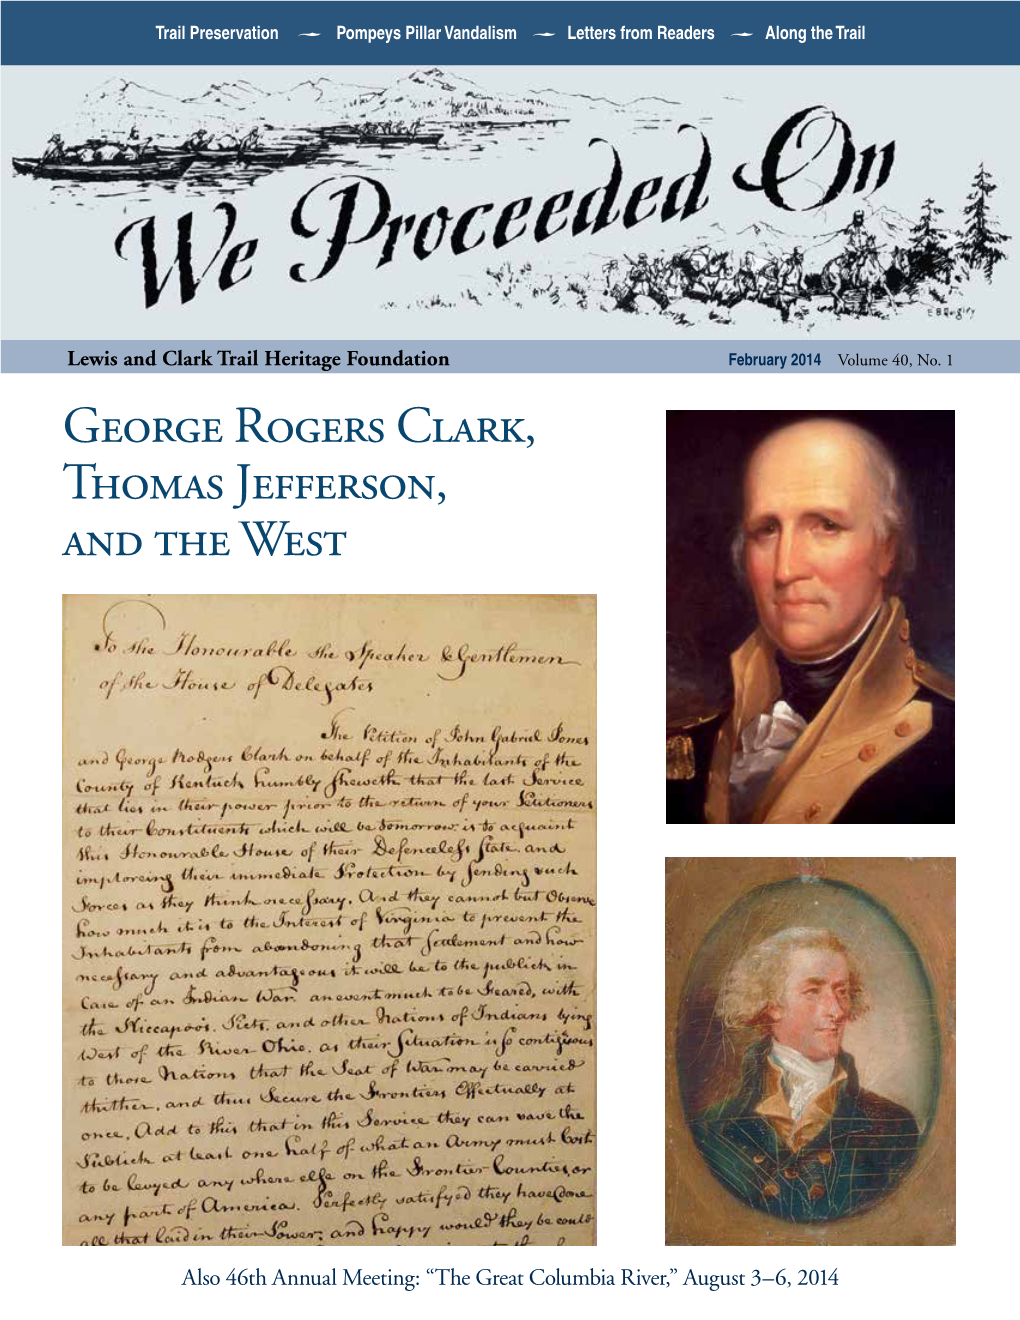 George Rogers Clark, Thomas Jefferson, and the West